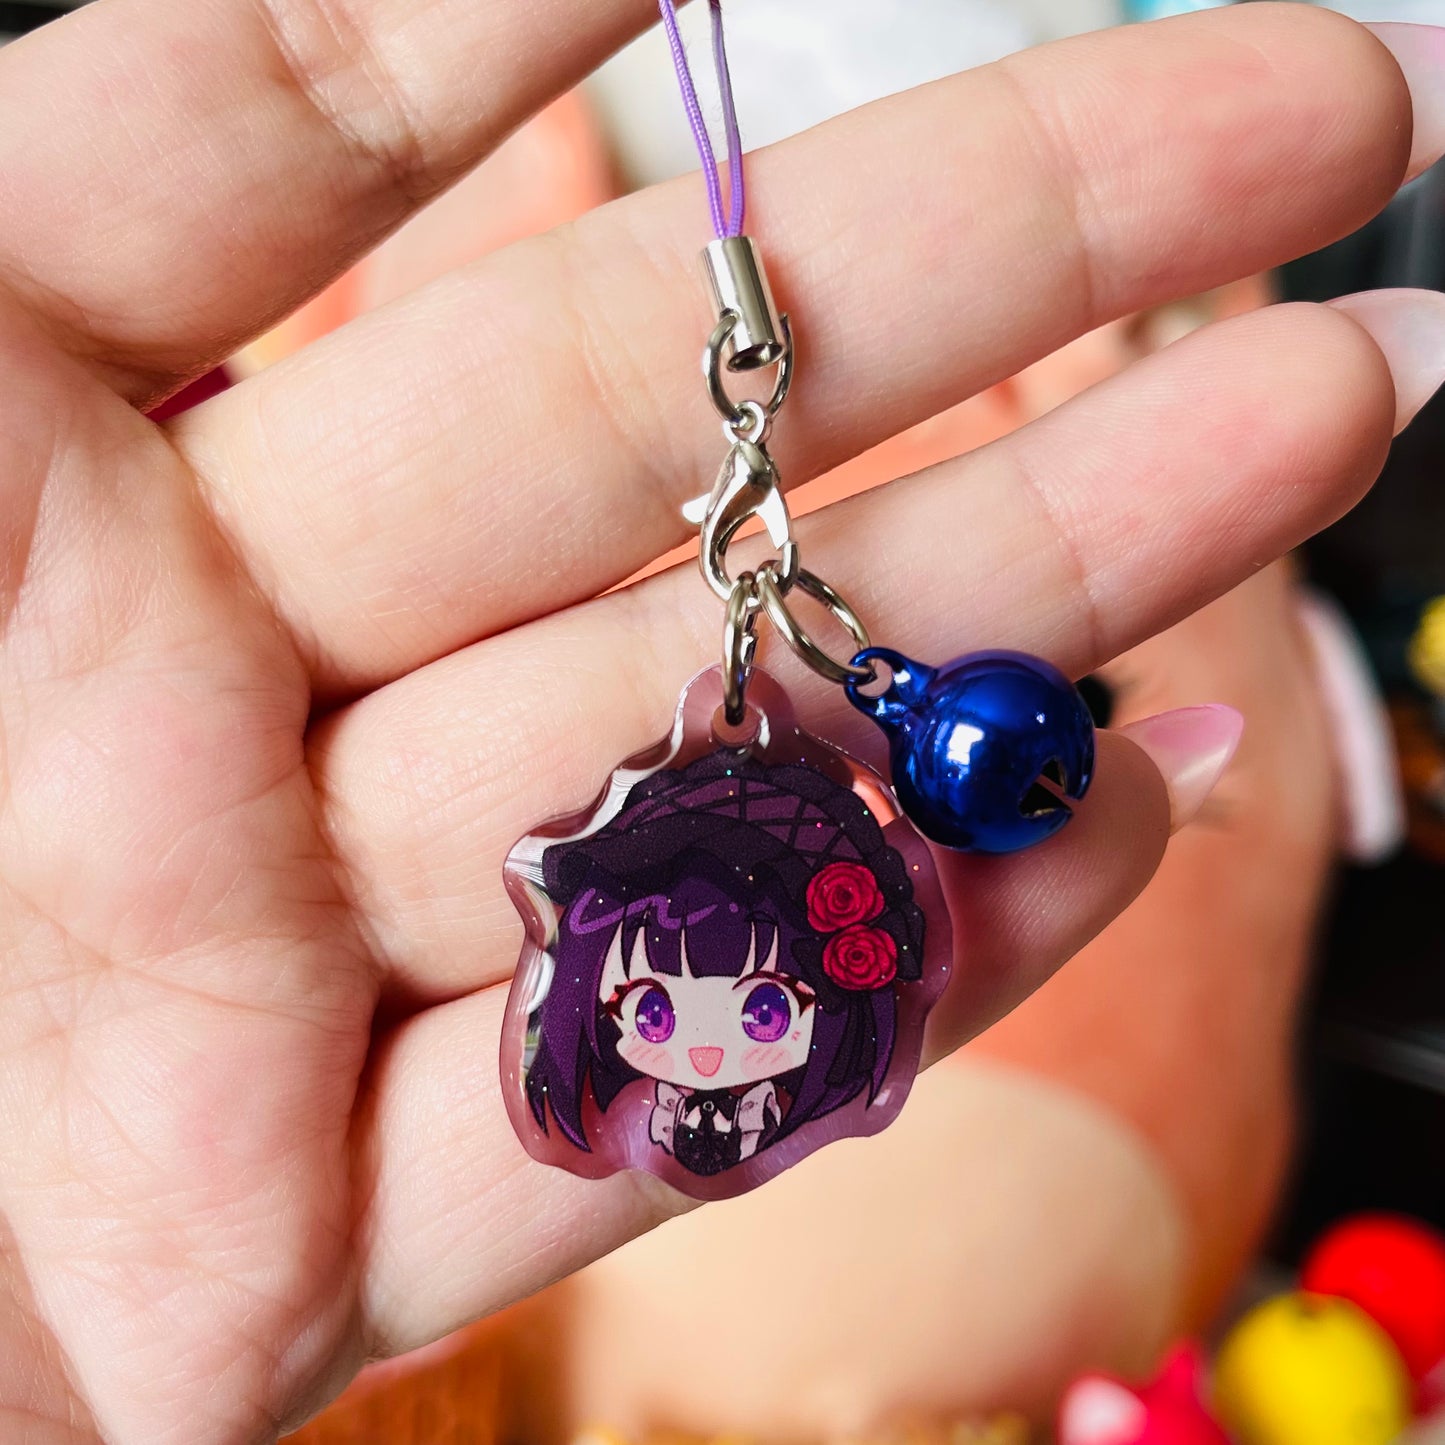 Cosplay Darling Phone Charms